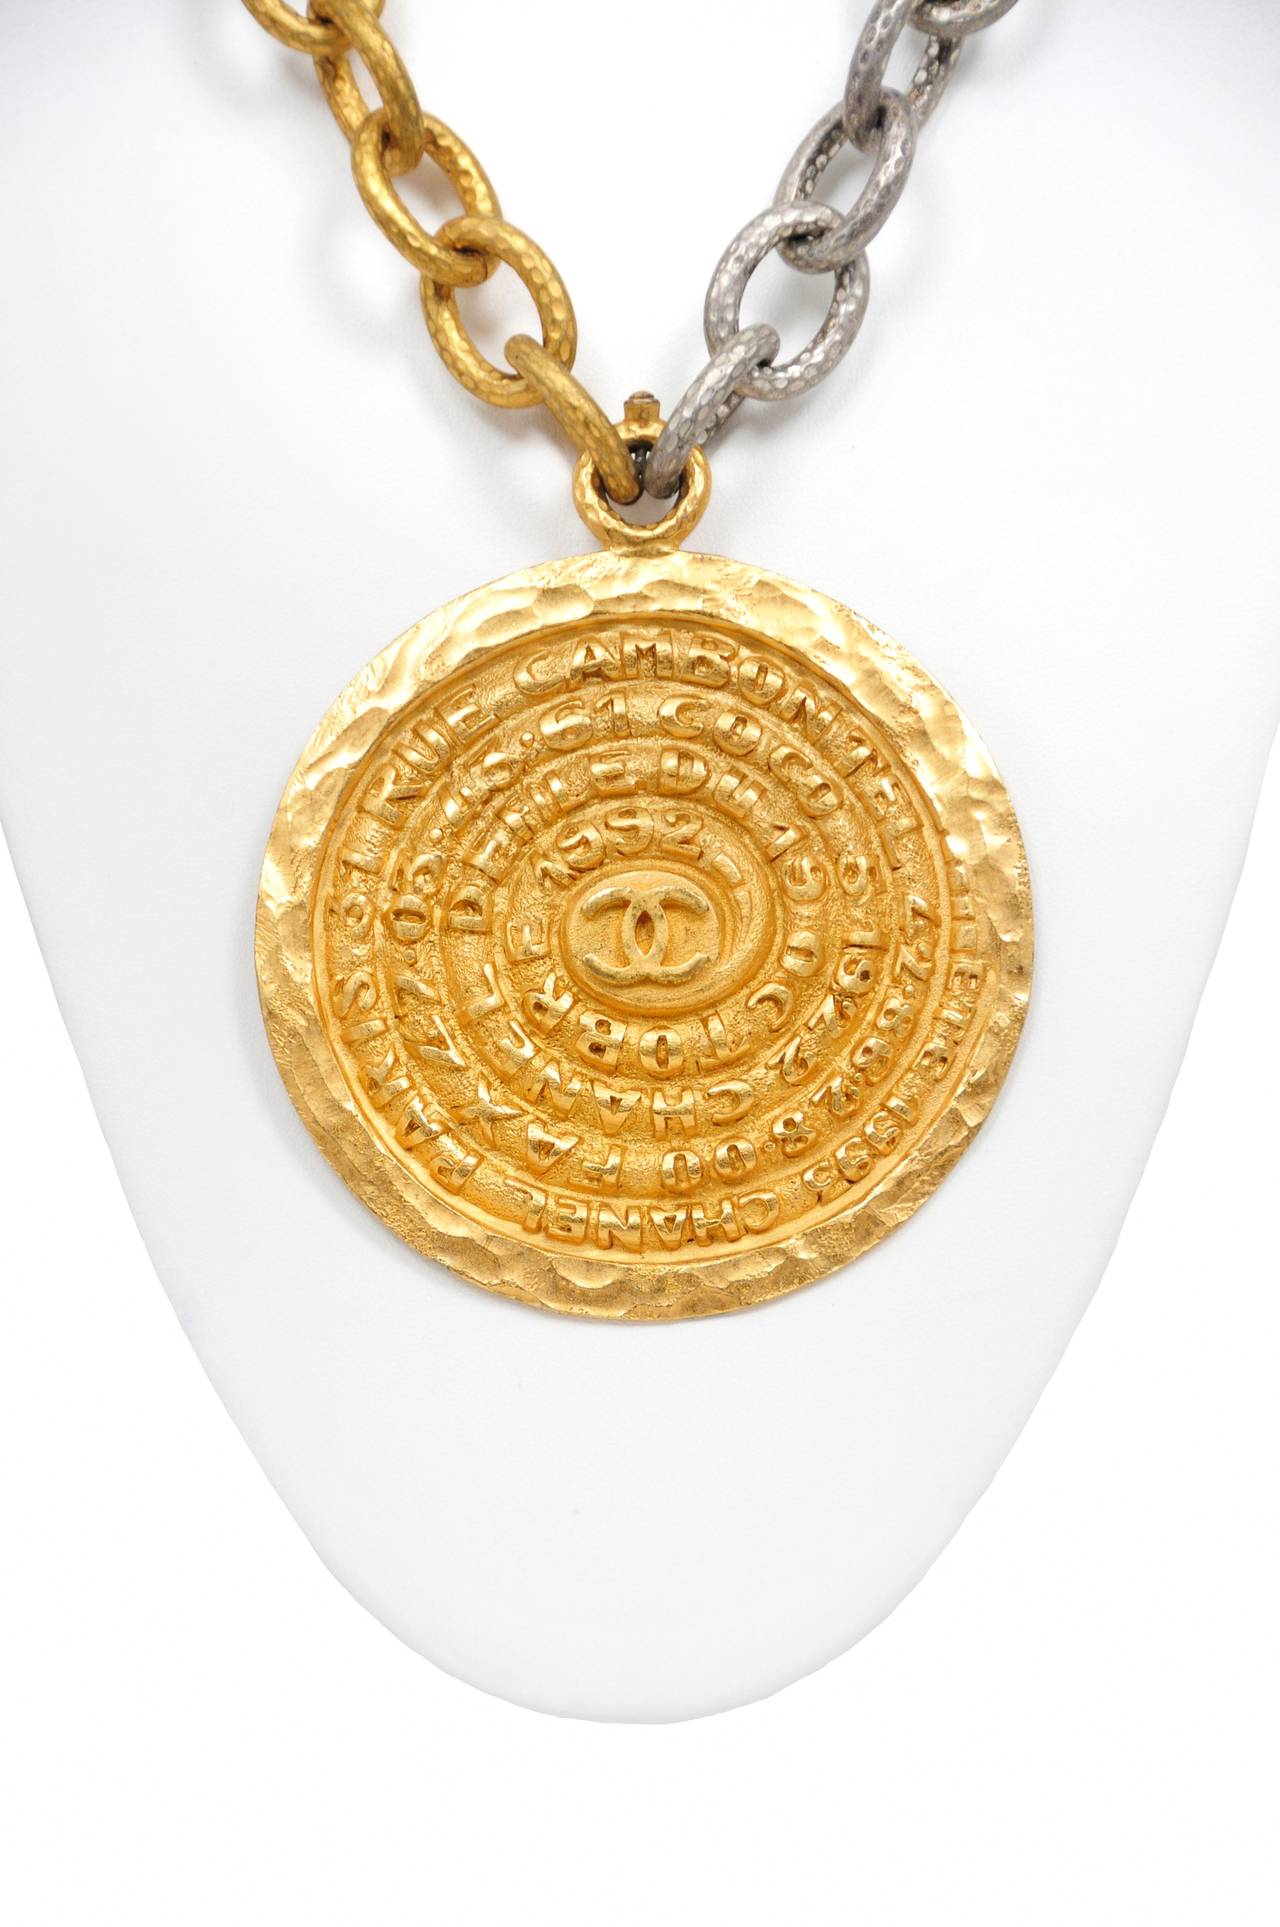 Vintage Chanel dial necklace featuring a large gold tone dial pendant labeled with Chanel's Paris address hanging on a two tone oversize chain.